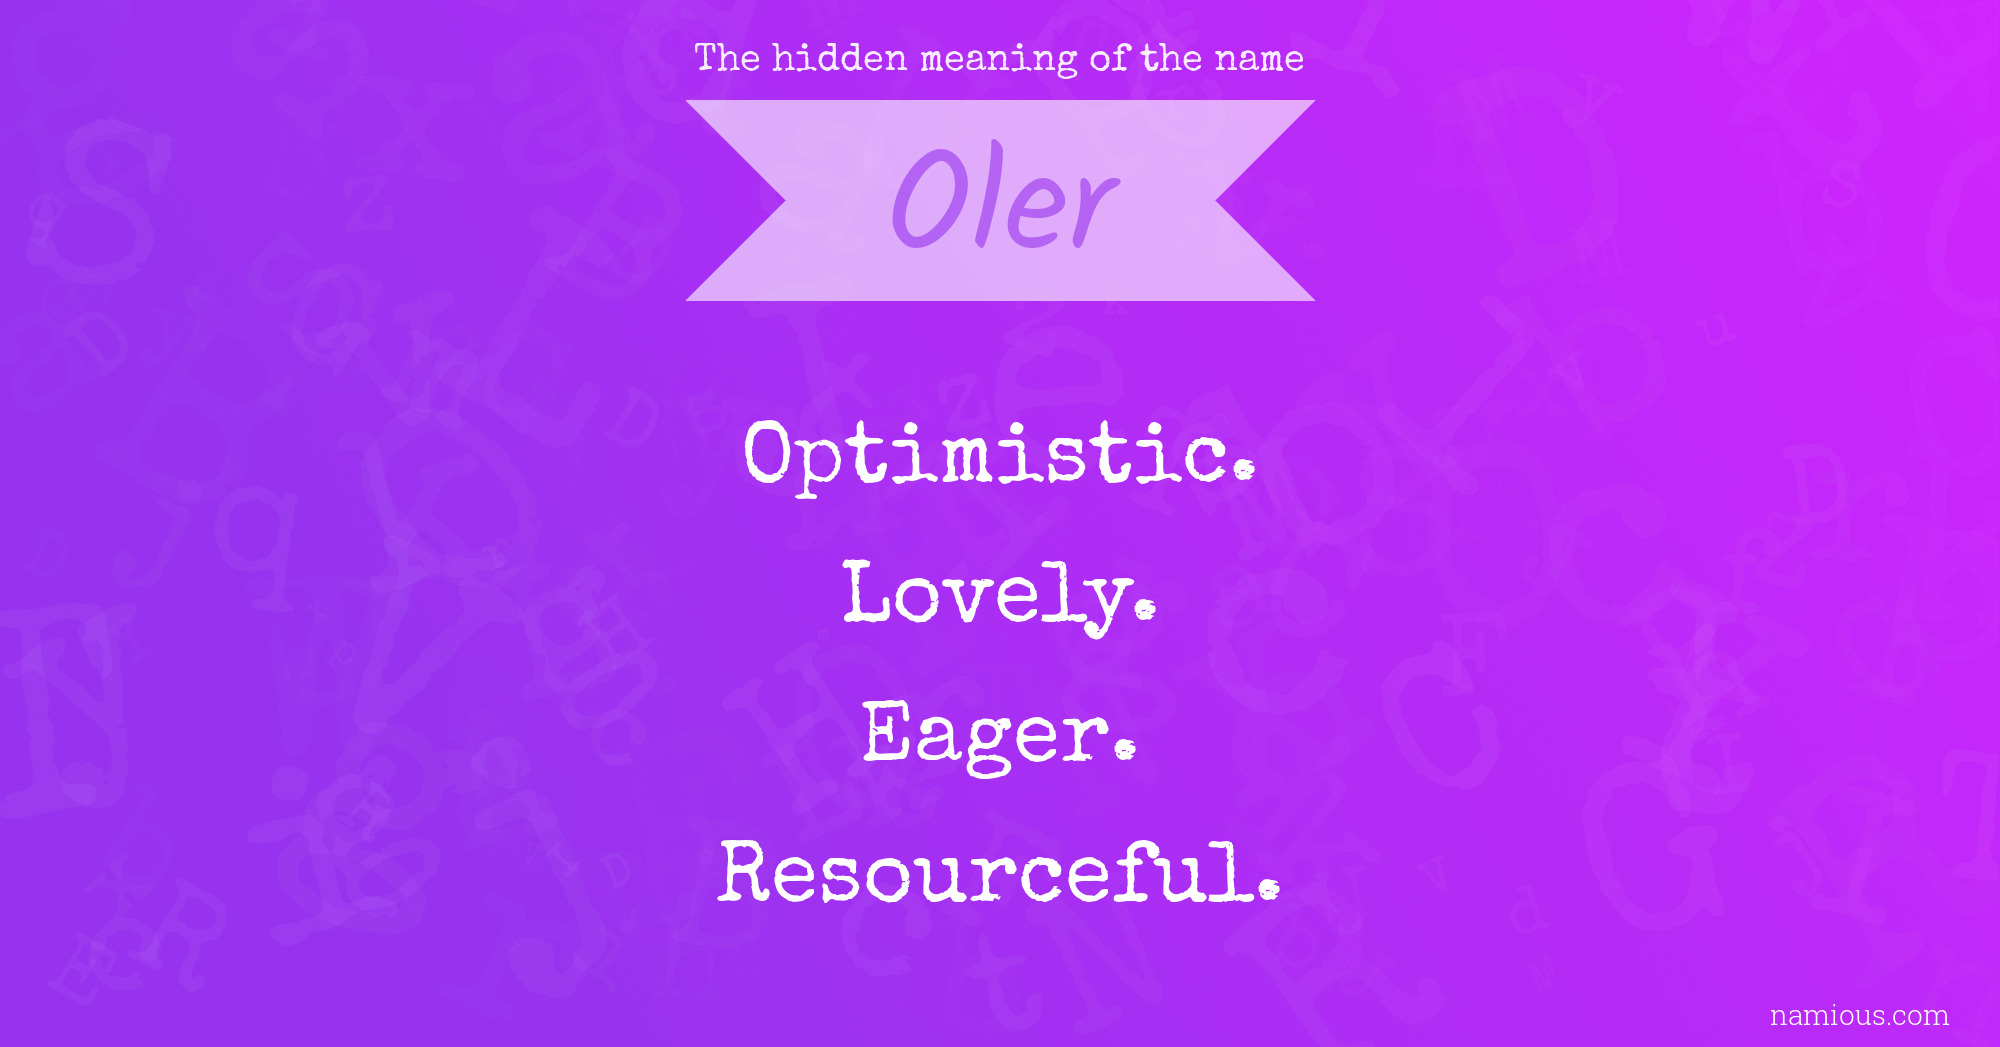 The hidden meaning of the name Oler